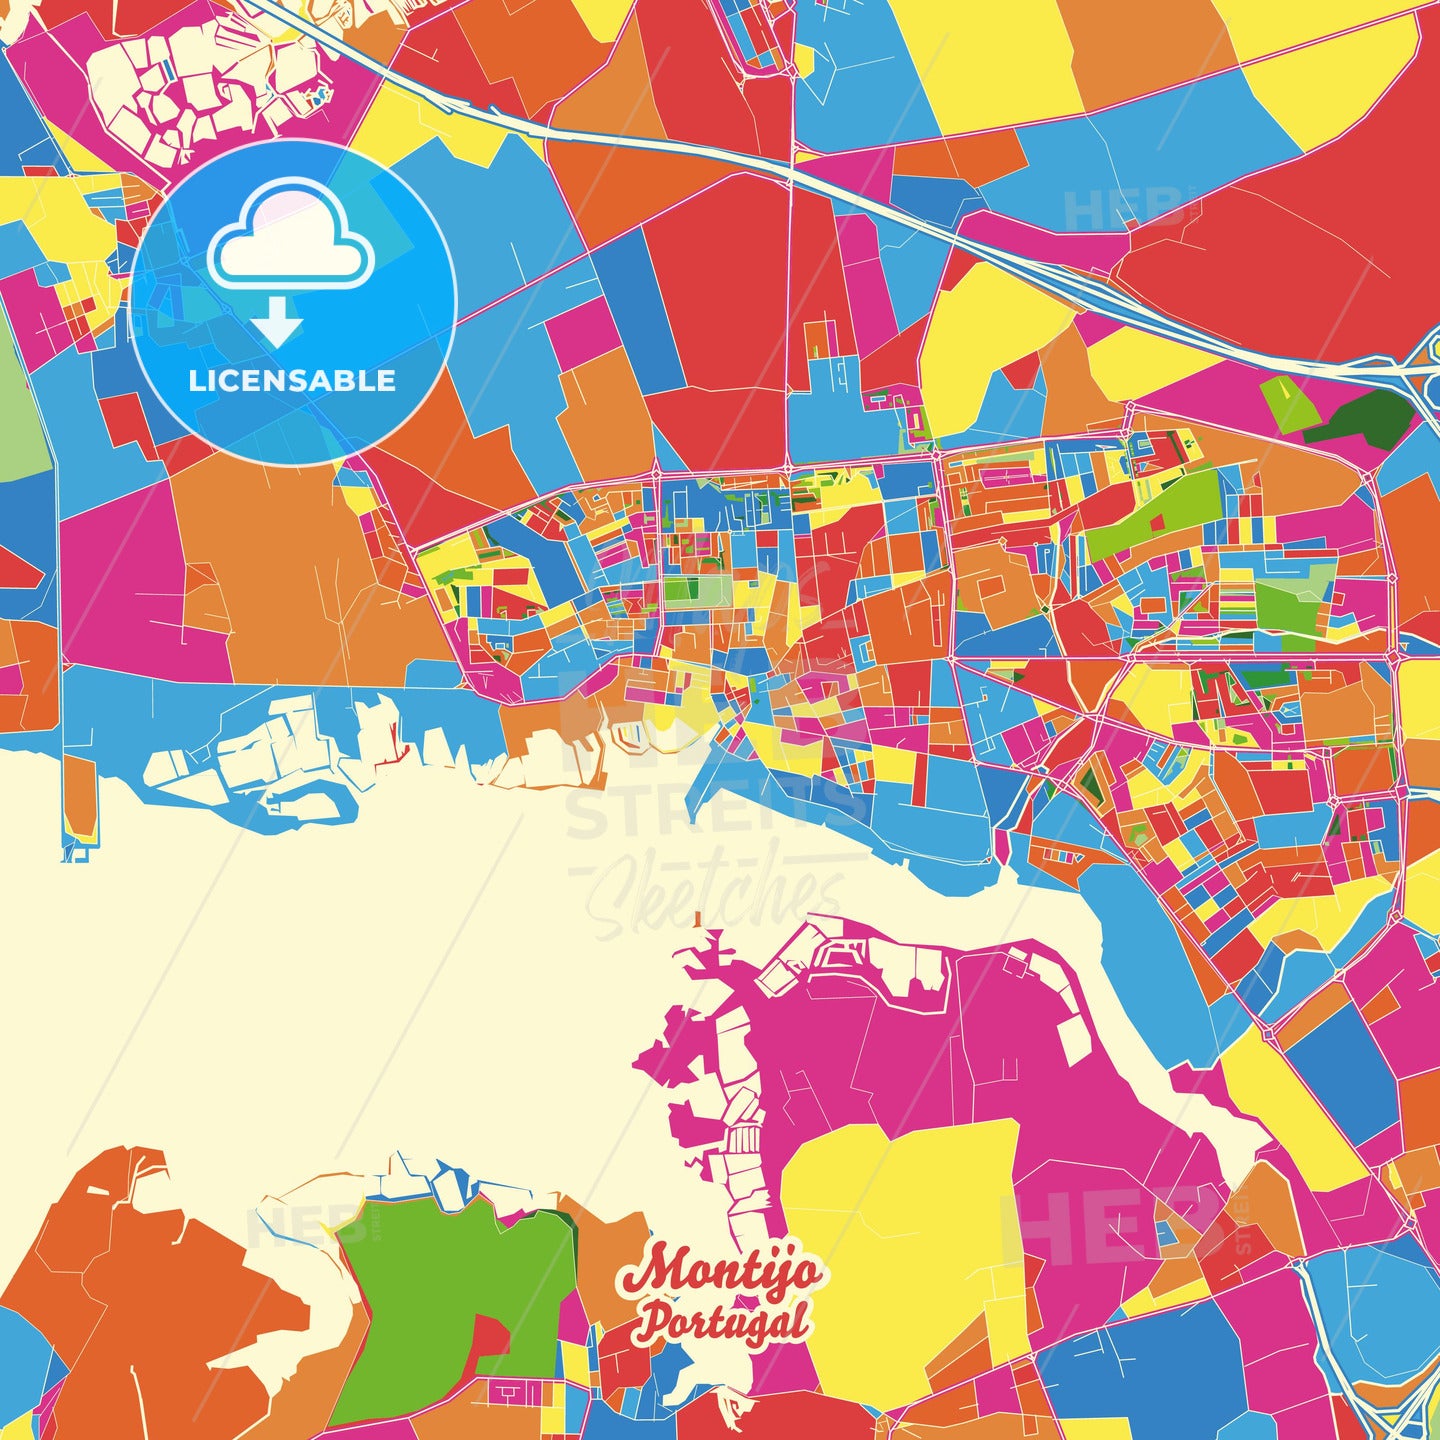 Montijo, Portugal Crazy Colorful Street Map Poster Template - HEBSTREITS Sketches